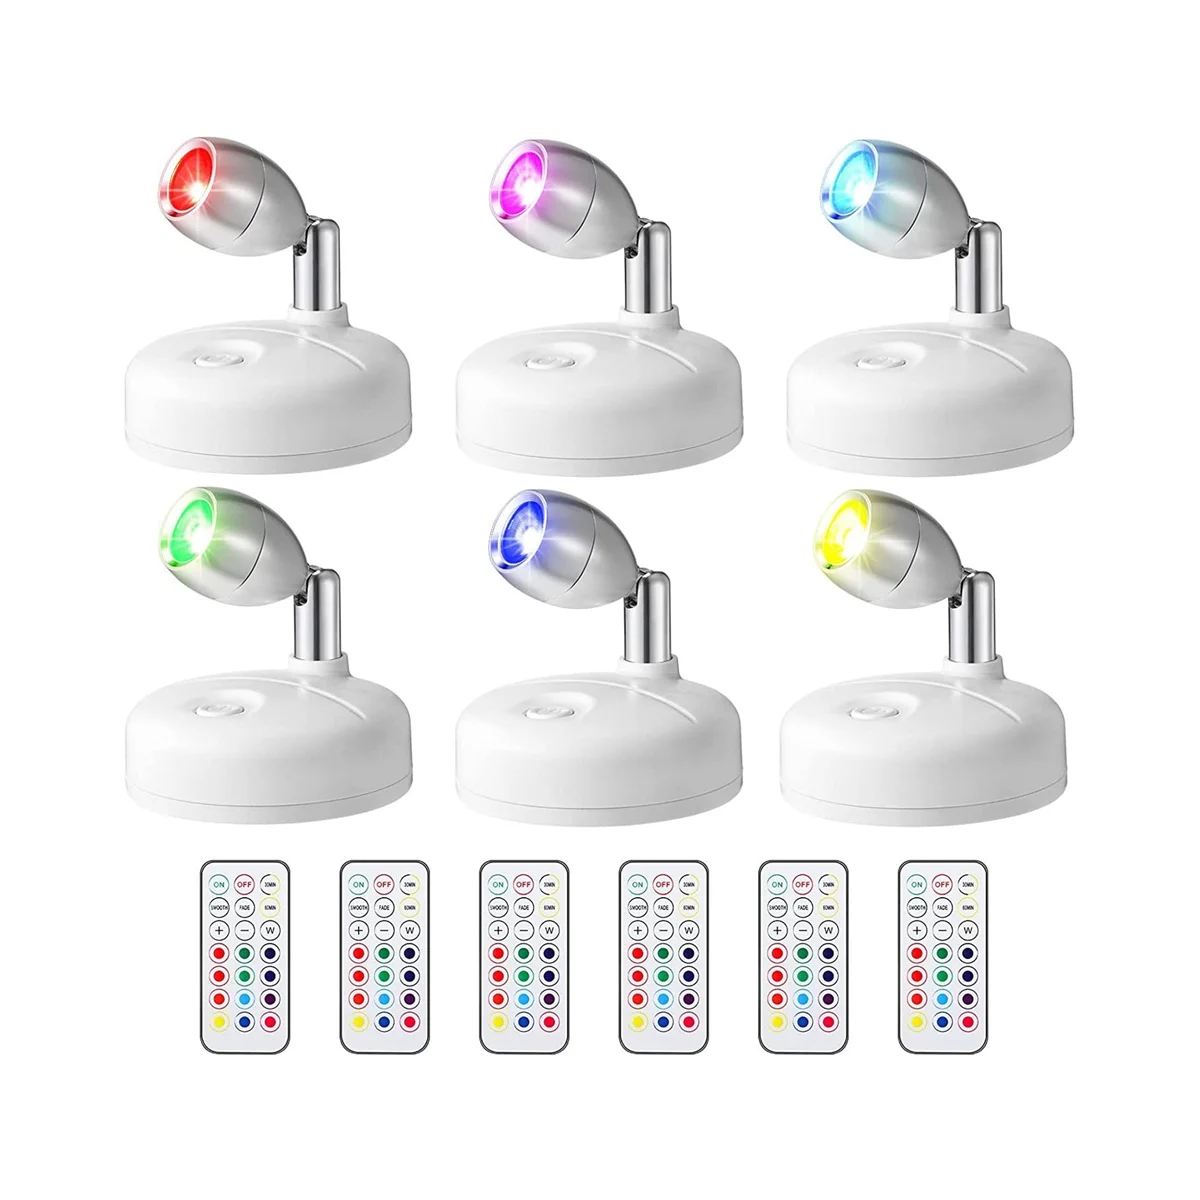 

6 Pcs RGB LED Spotlight with Remote, 13 Color Spotlight, Battery Operated Lights for Hallway Artwork Closet White